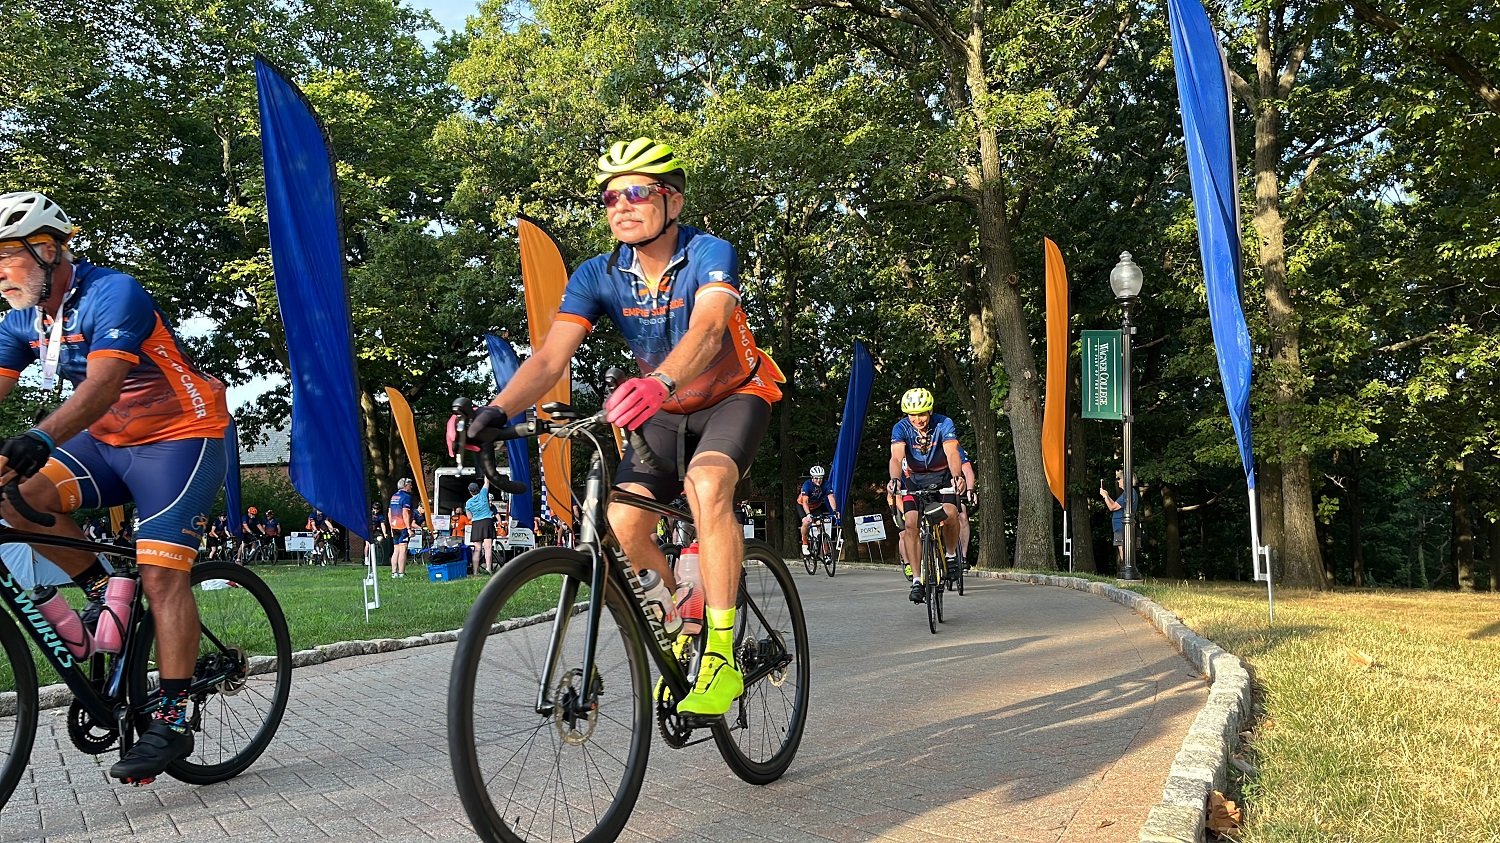 Cyclists begin a more than 500-mile journey in this submitted file photo. More than 200 cyclists will arrive in the city on Thursday, completing the fourth leg of a ride across New York to raise funds for cancer research at Roswell Park Comprehensive Cancer Center in Buffalo.